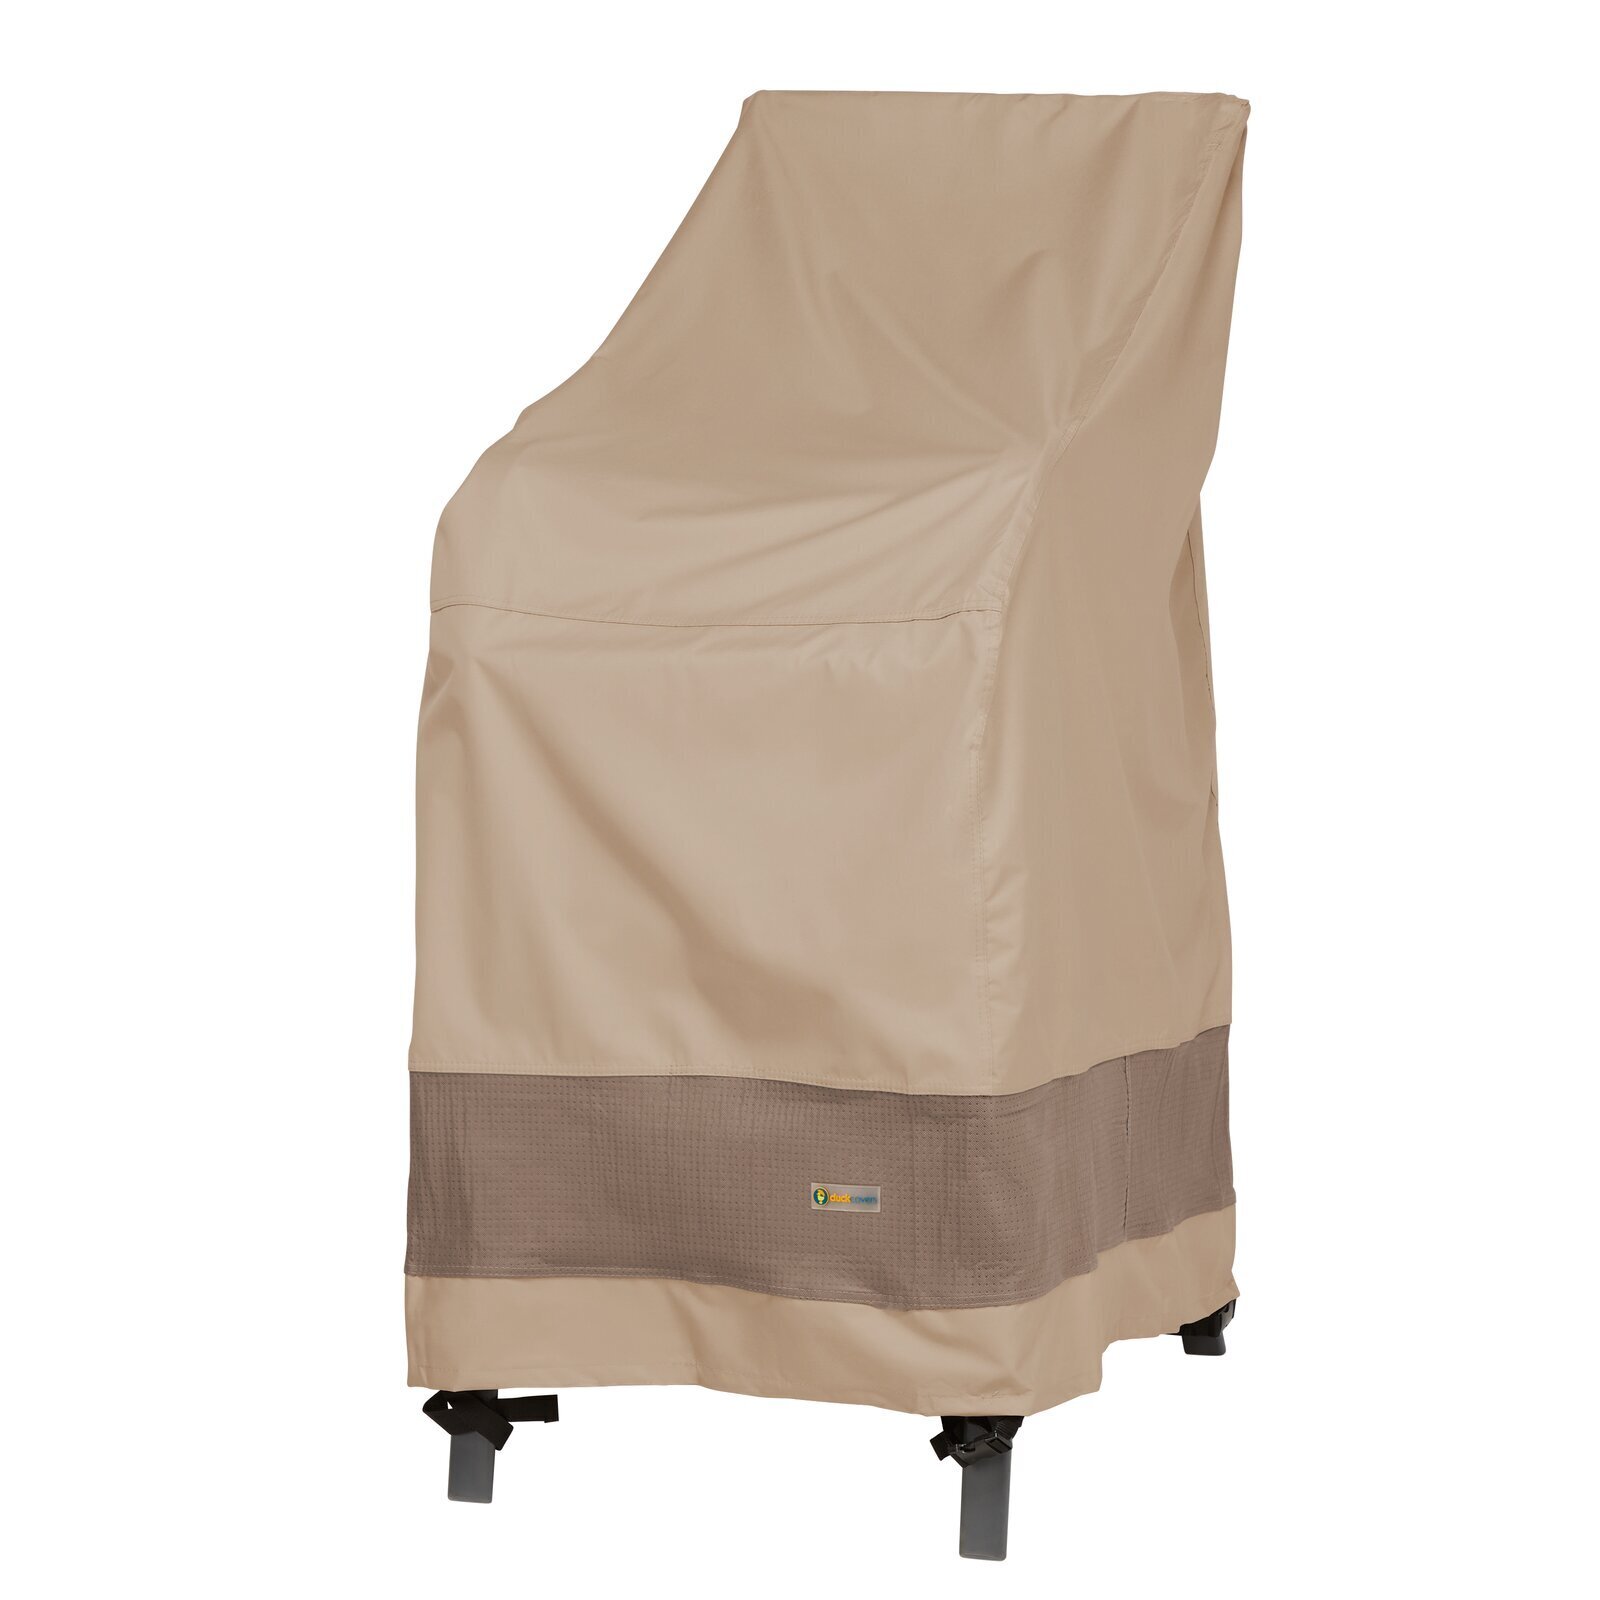 Beige Heavy Duty Plastic Chair Cover 